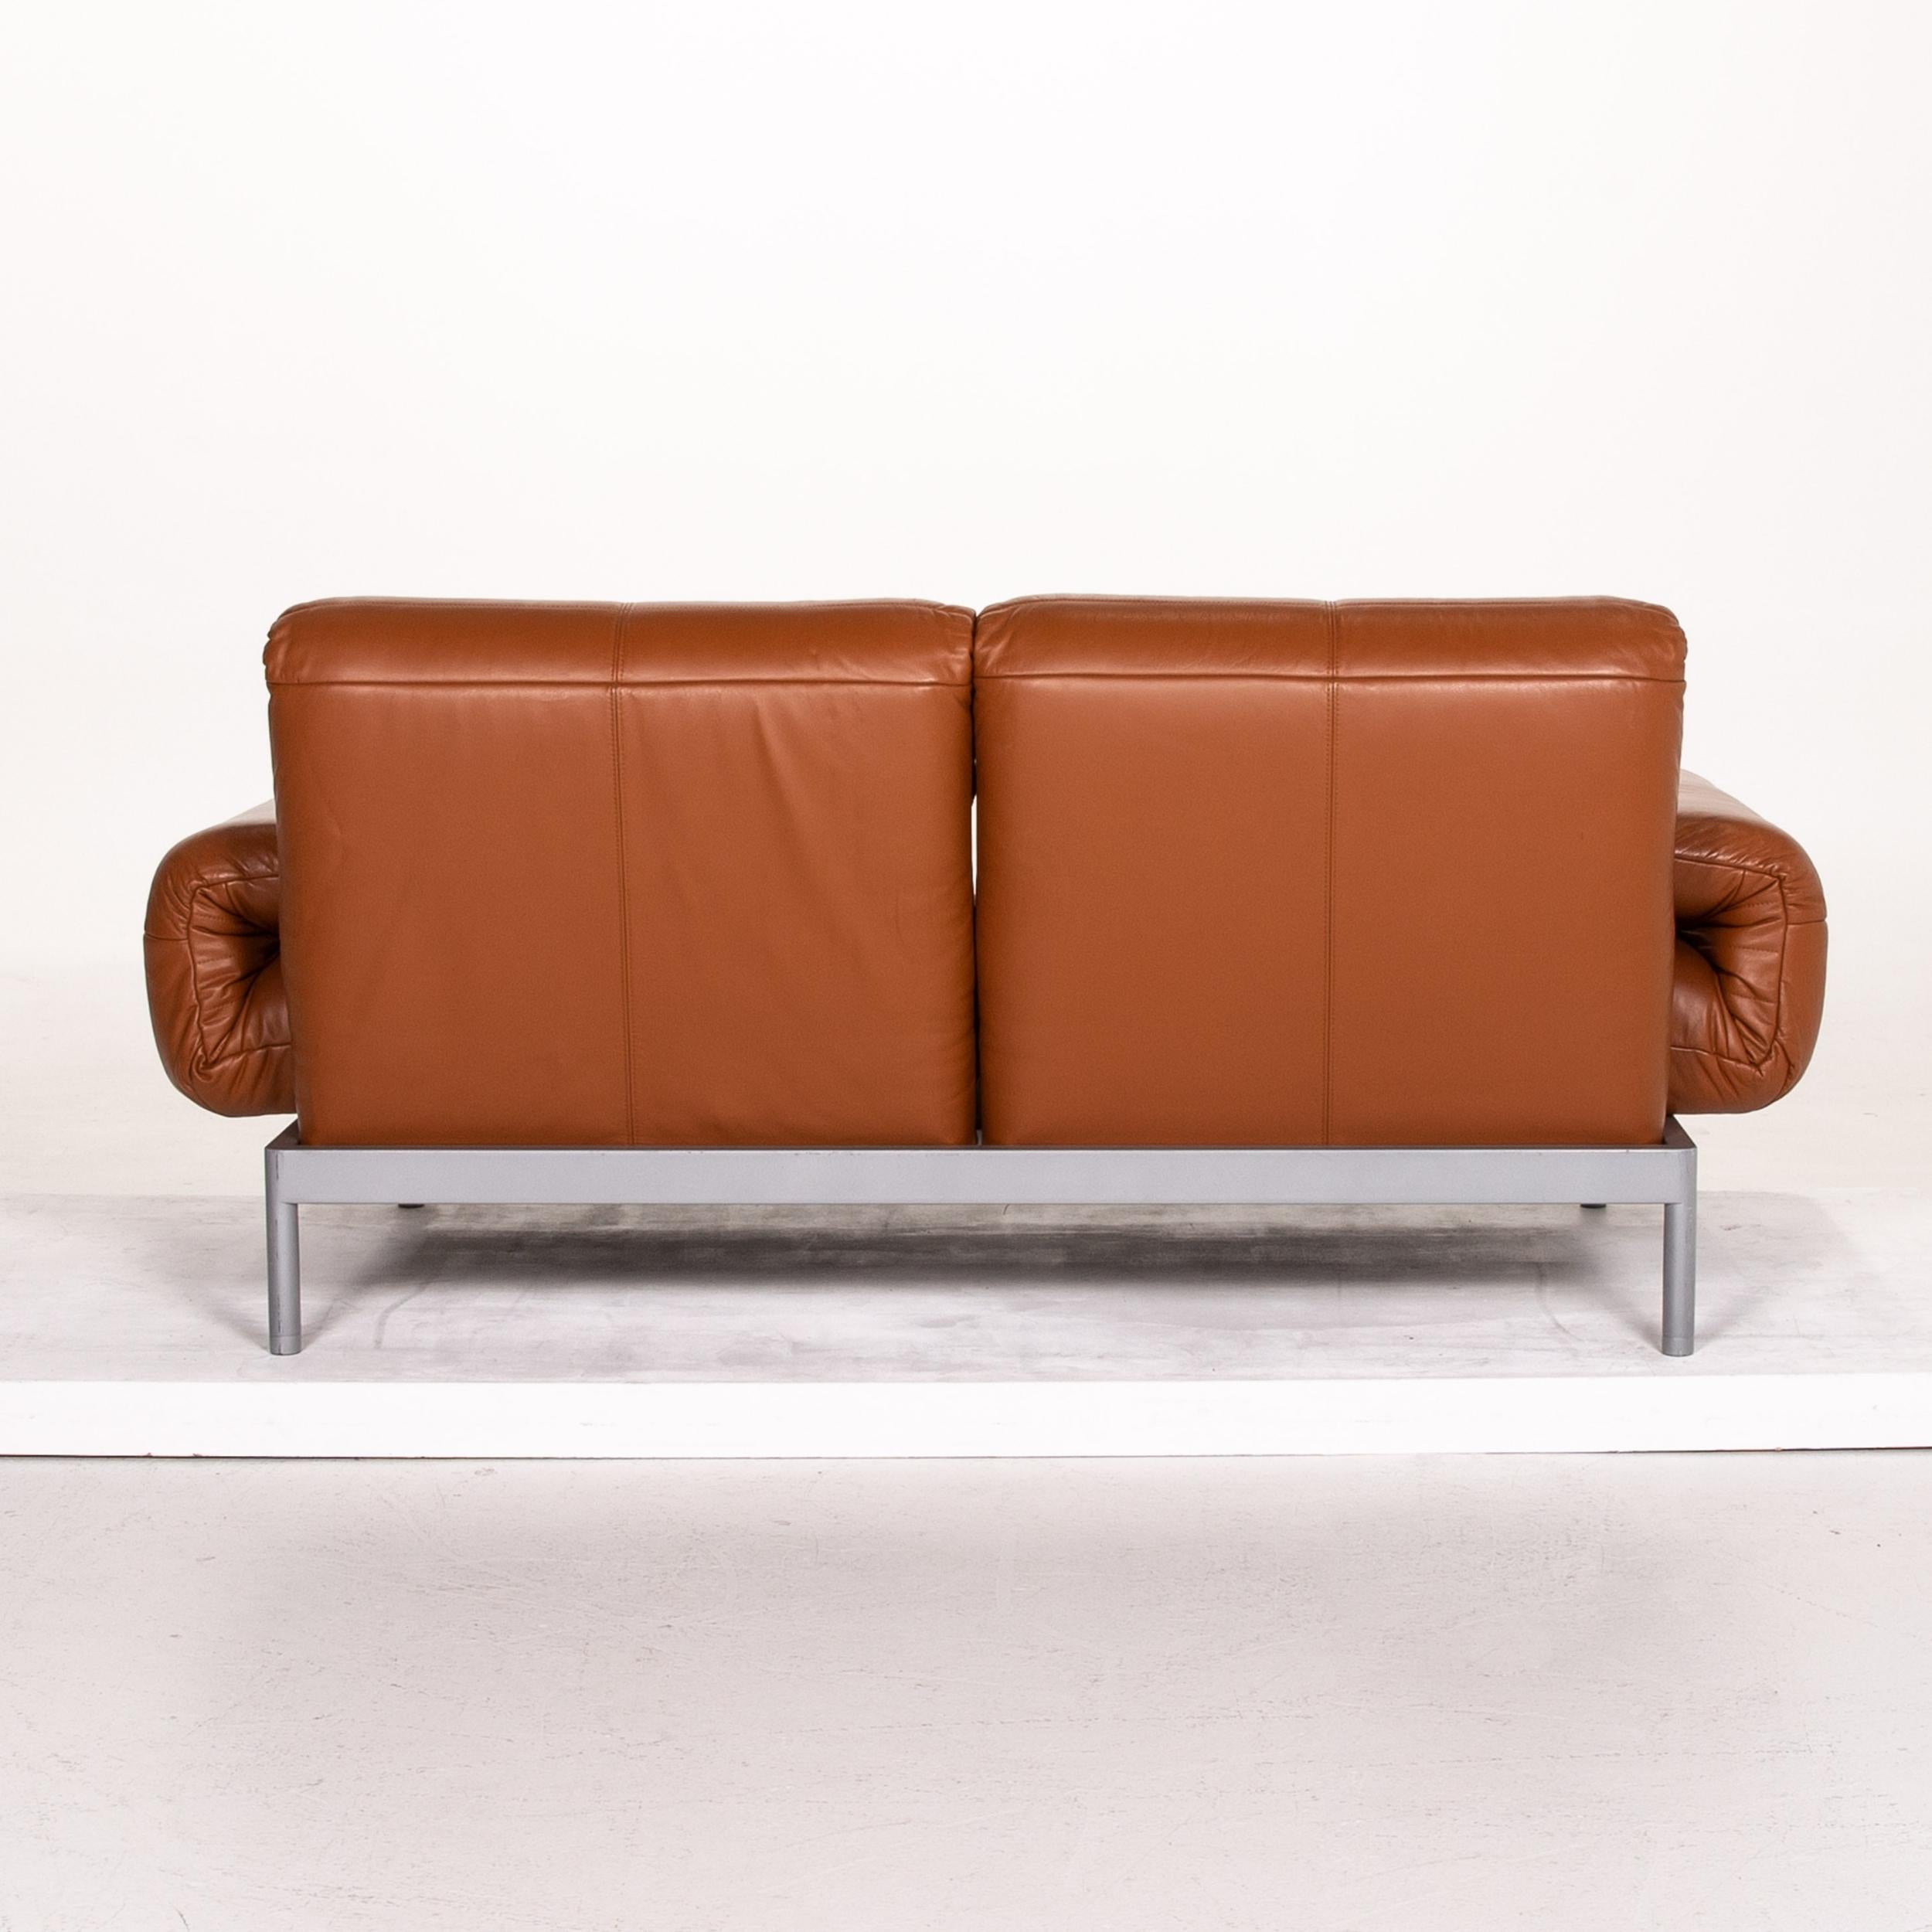 Rolf Benz Plura Leather Sofa Cognac Brown Two-Seat Function Relax Function 3